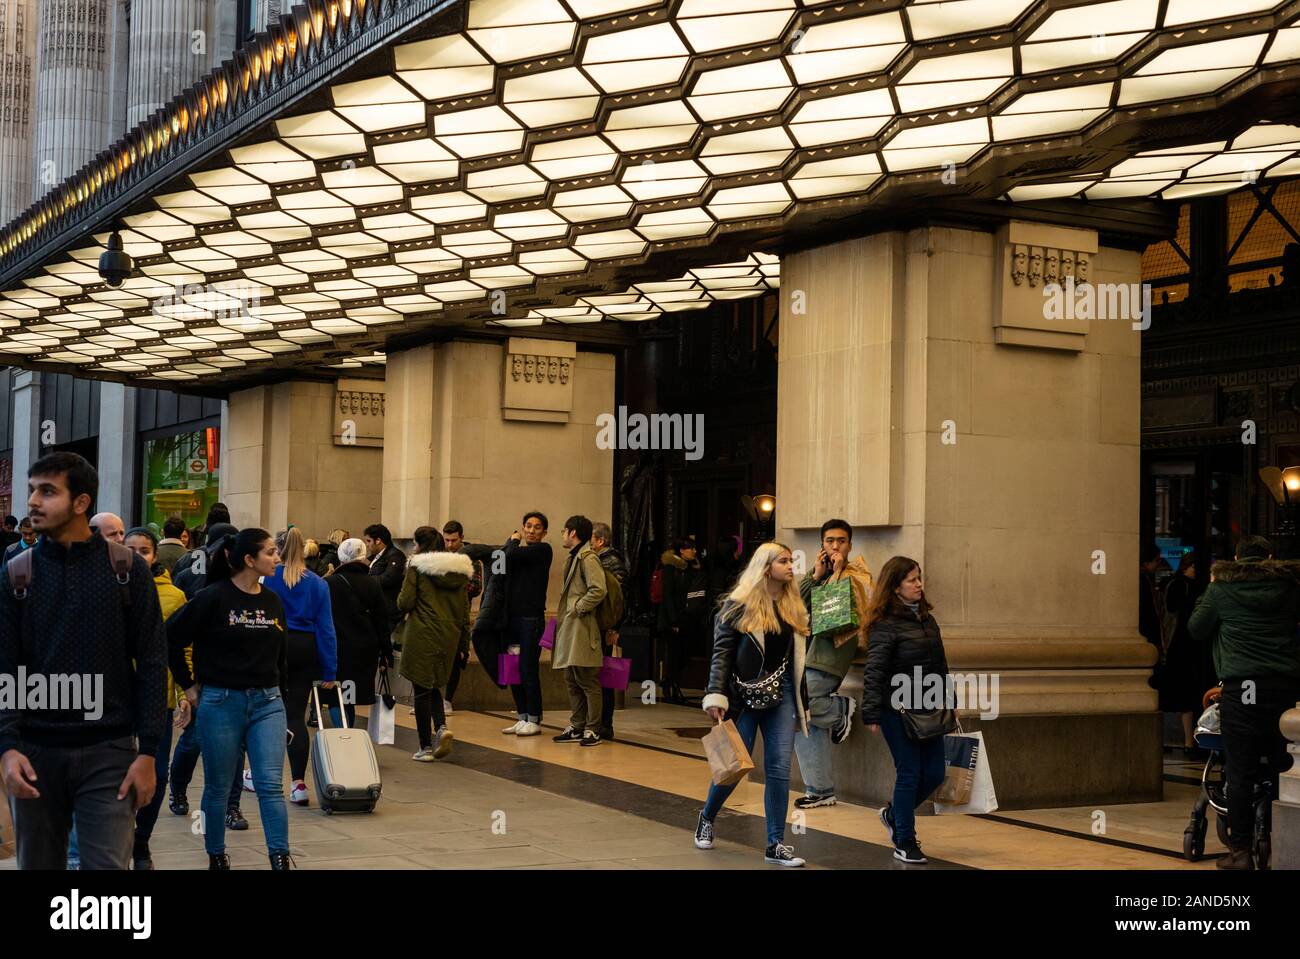 Selfridges London Oxford Street London retail evening view of shoppers people walking past the Selfridges department store entrance in Oxford Street London, UK as of February 2020 Stock Photo